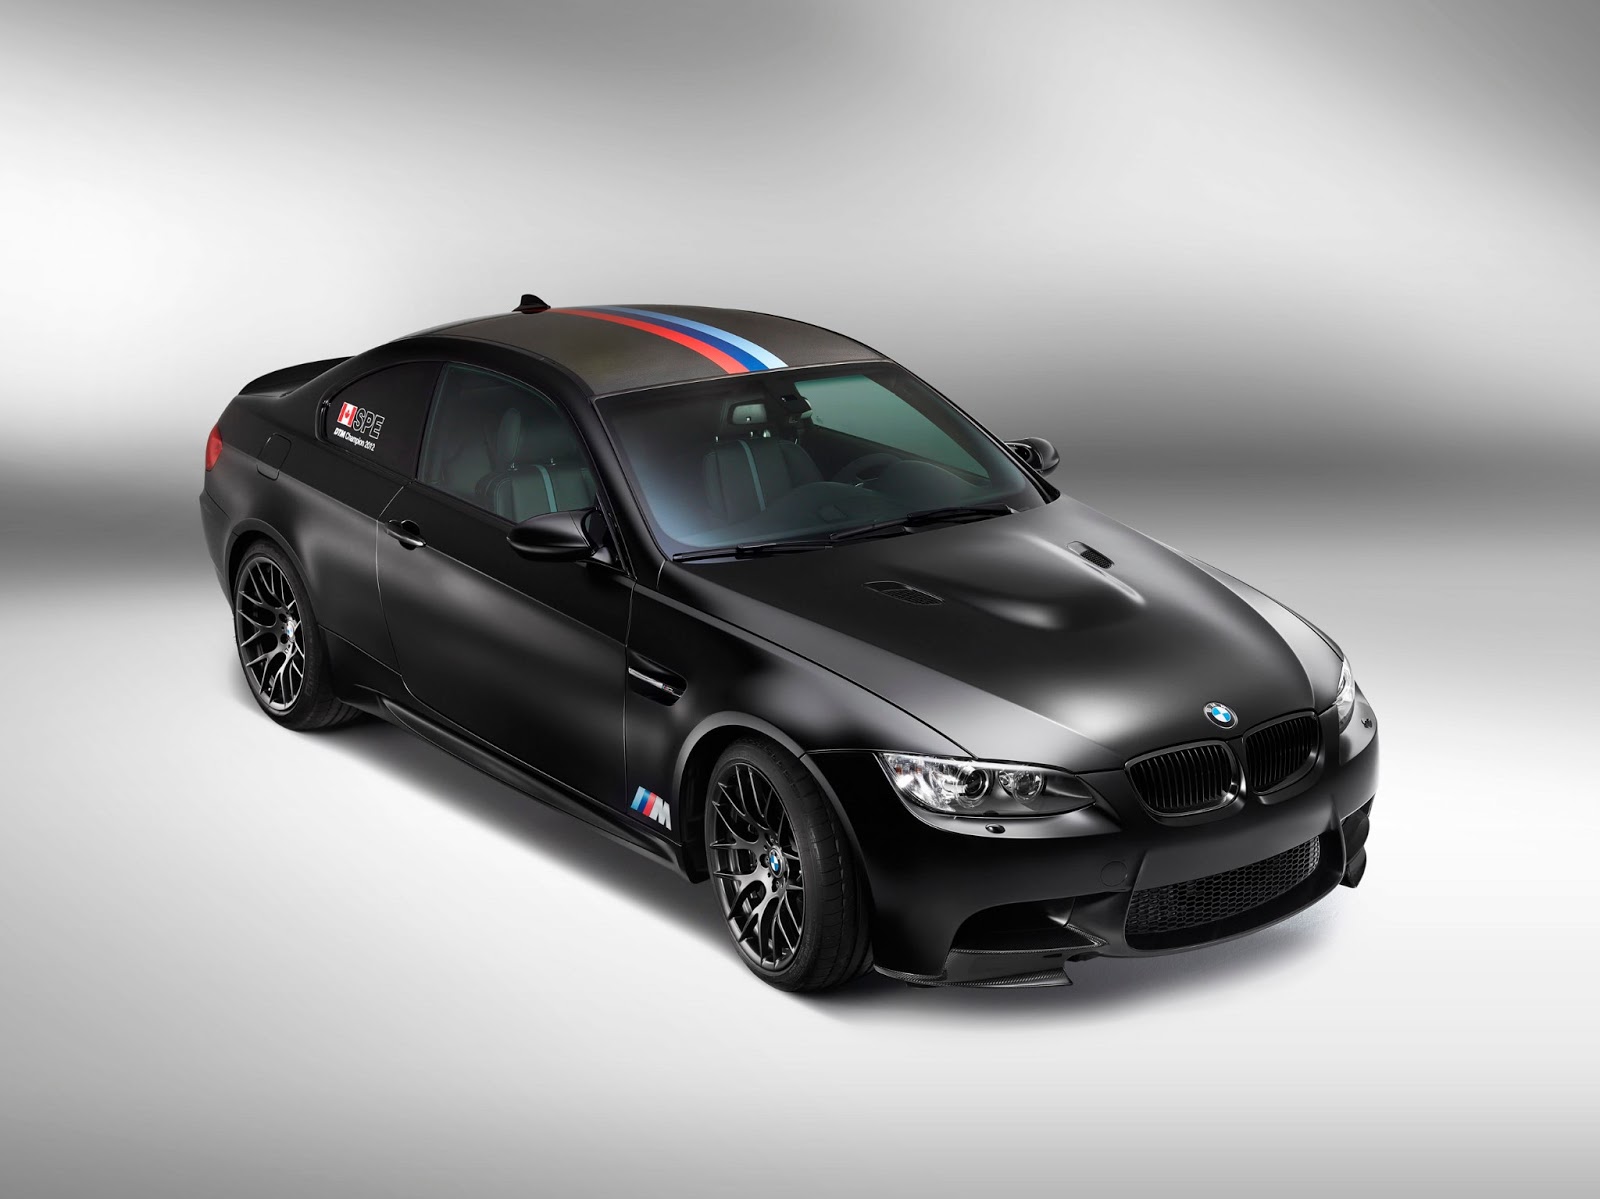 Cars 2 U: BMW E92 M3 DTM Champion Edition 2013 Pictures Wallpapers ...